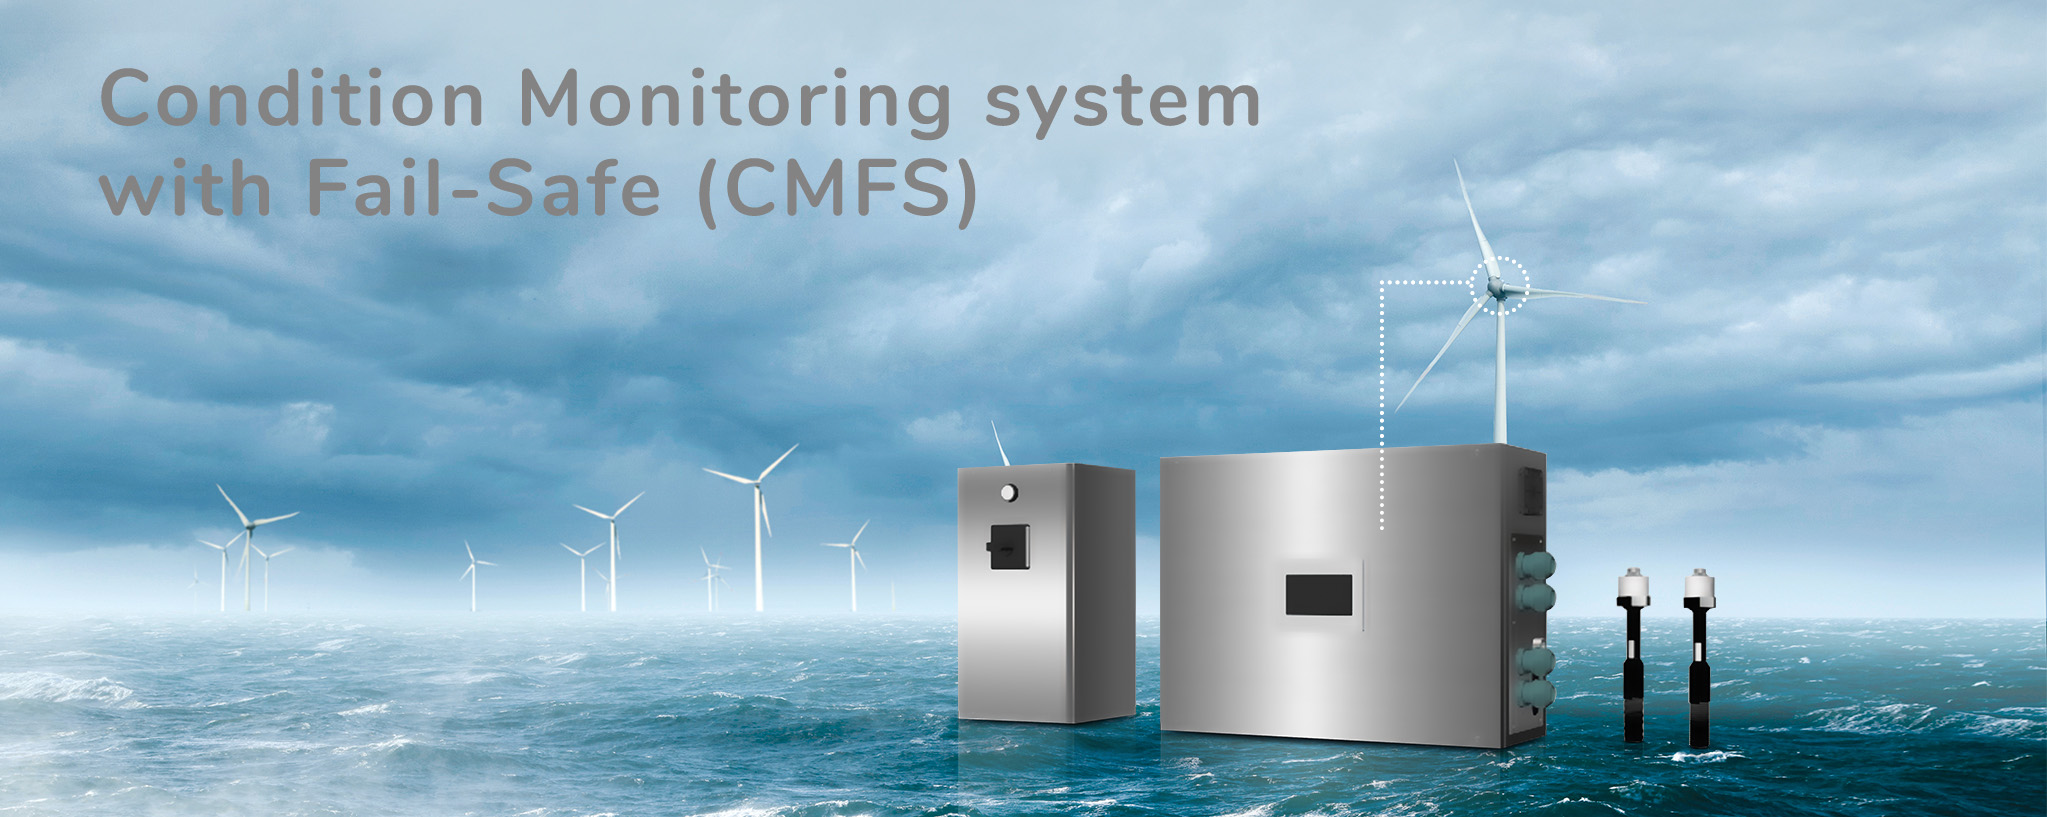 Condition Monitoring system with Fail-Safe(CMFS)